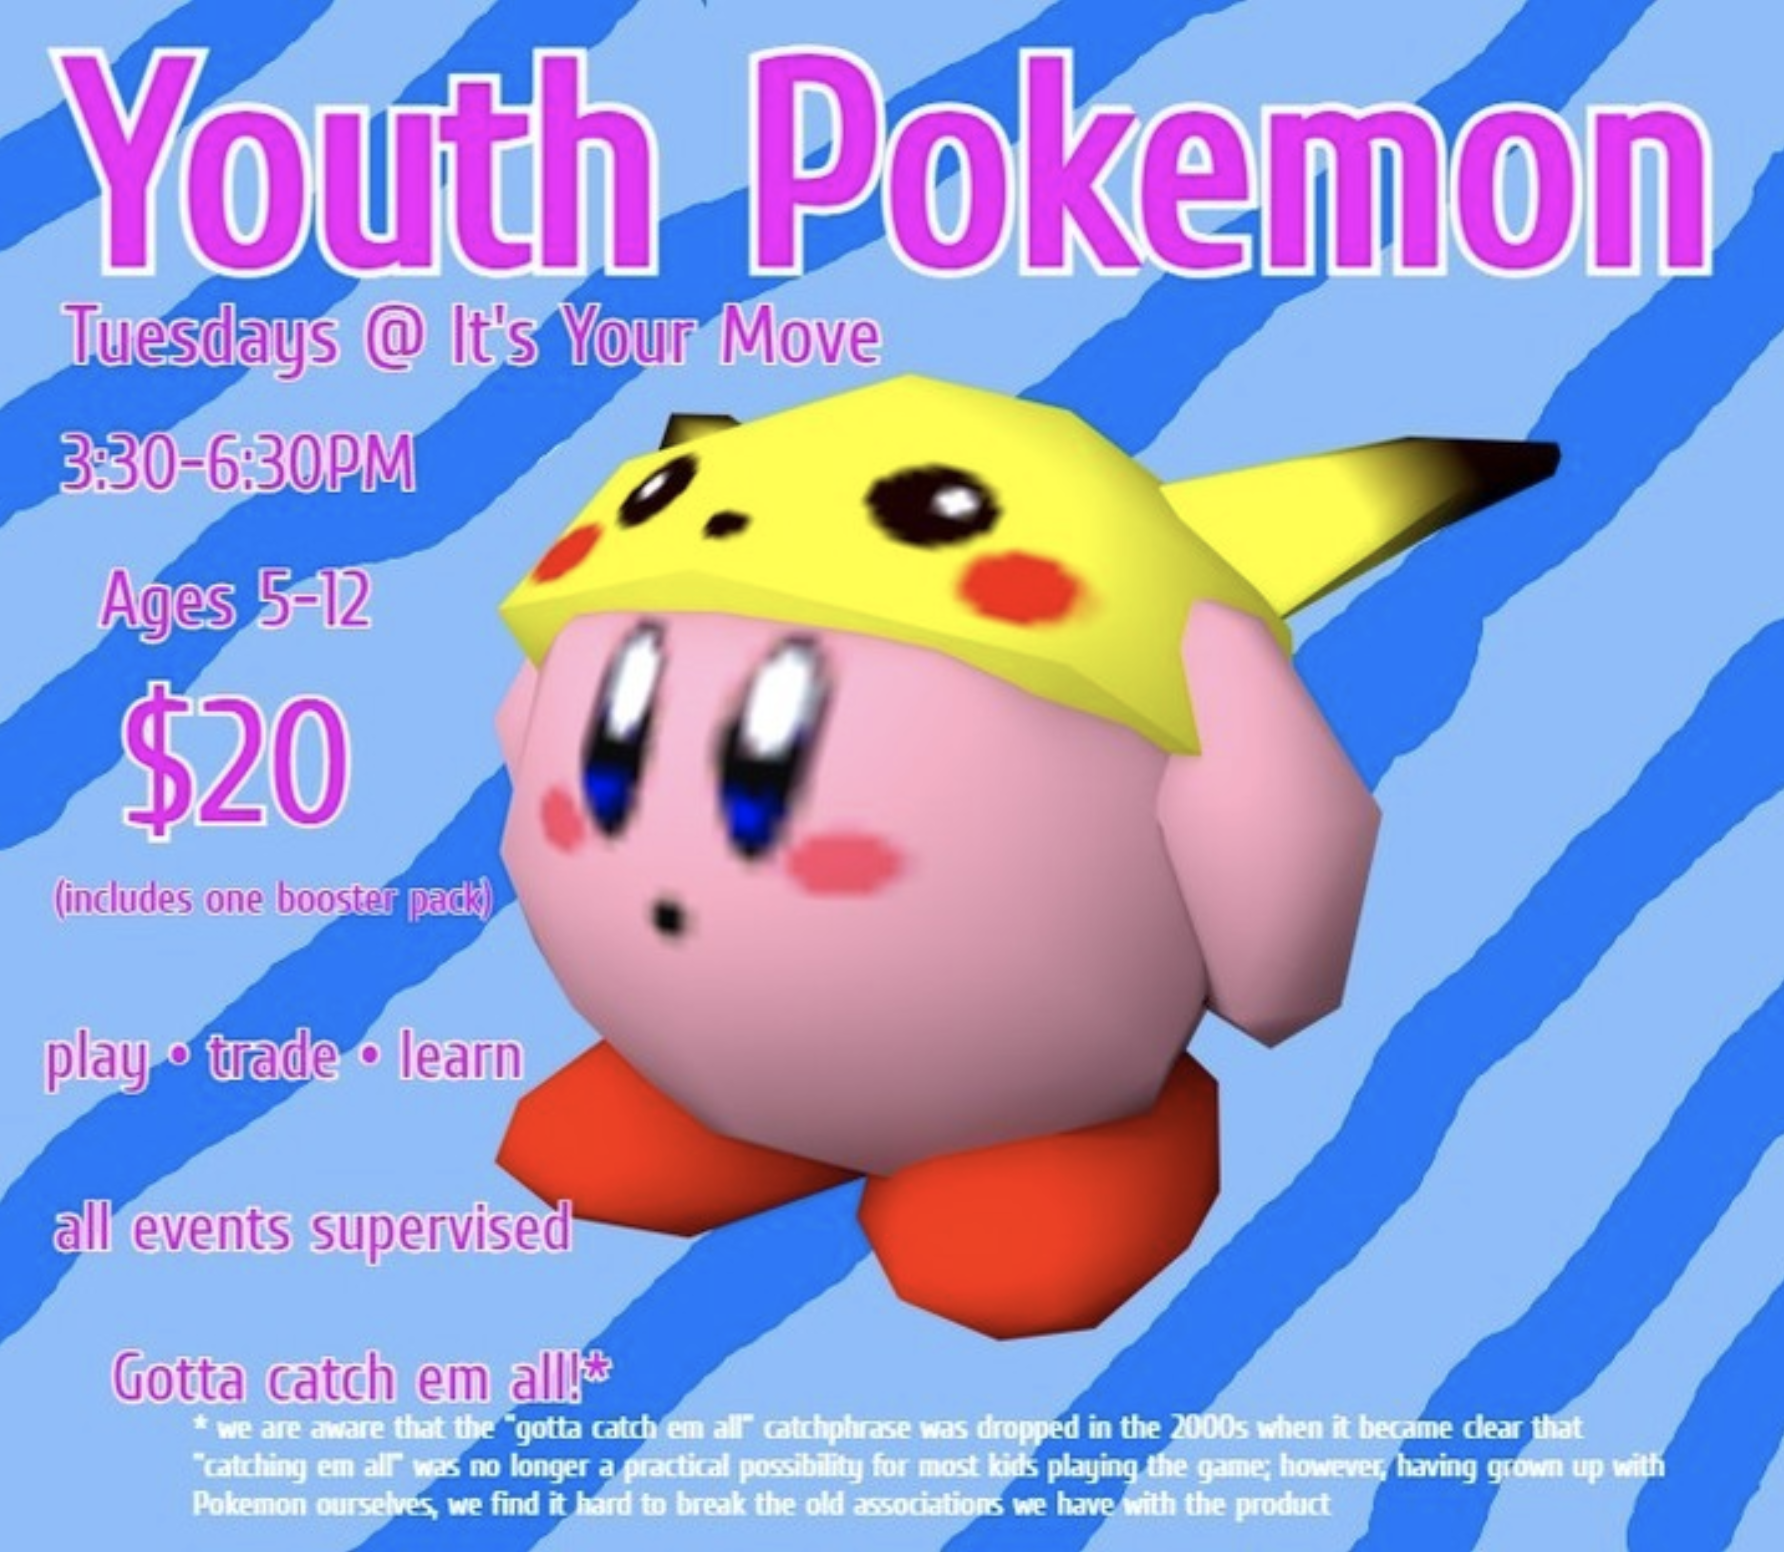 After-school youth Pokemon at It's Your Move Games